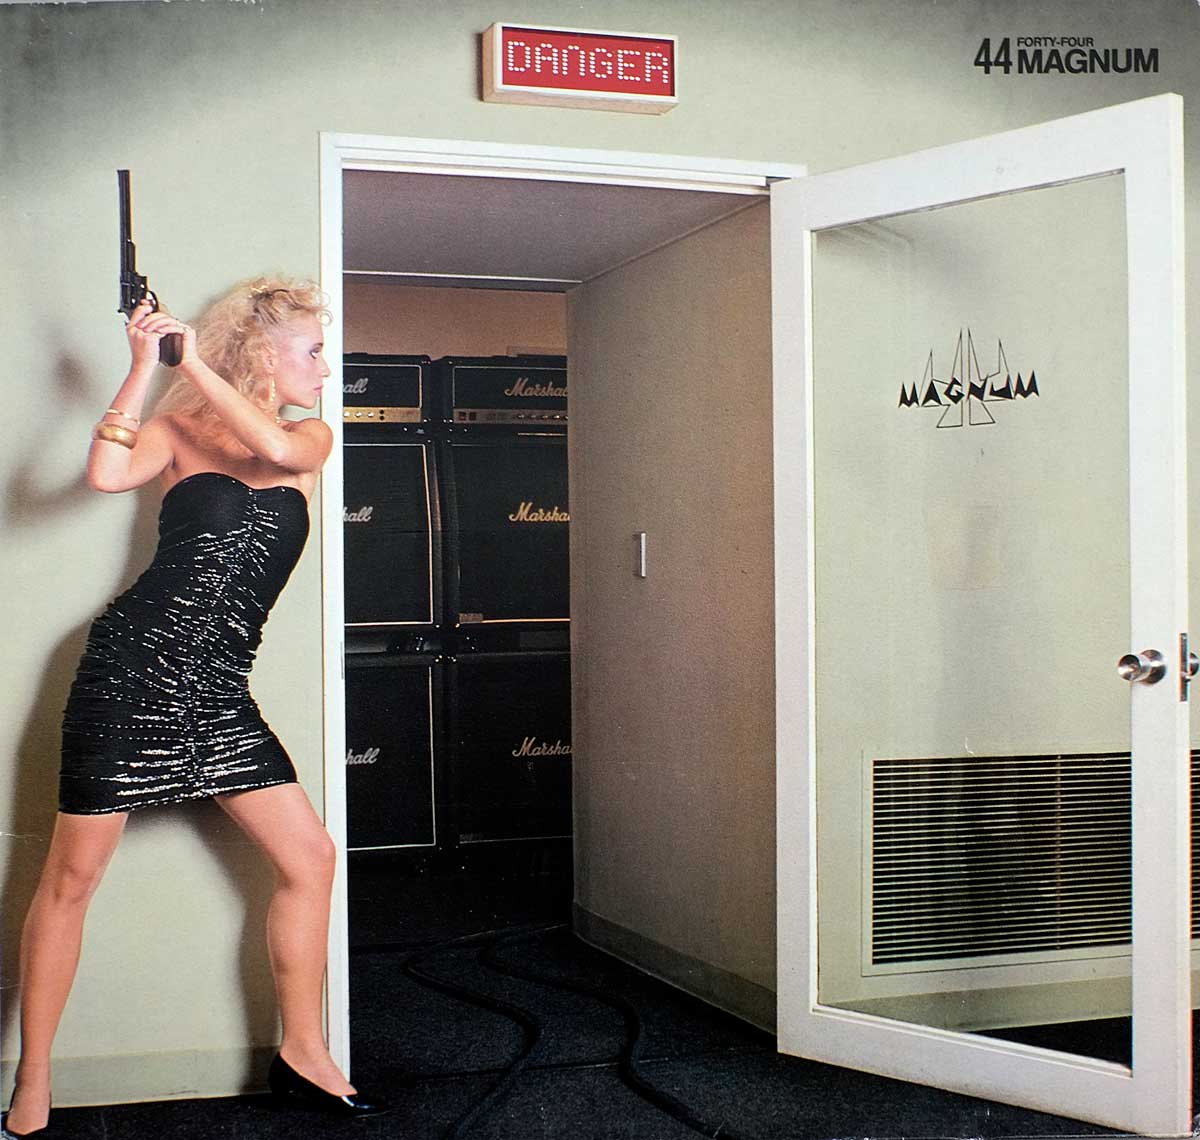 the album front cover shows a woman in a short black dress holding a gun in the air